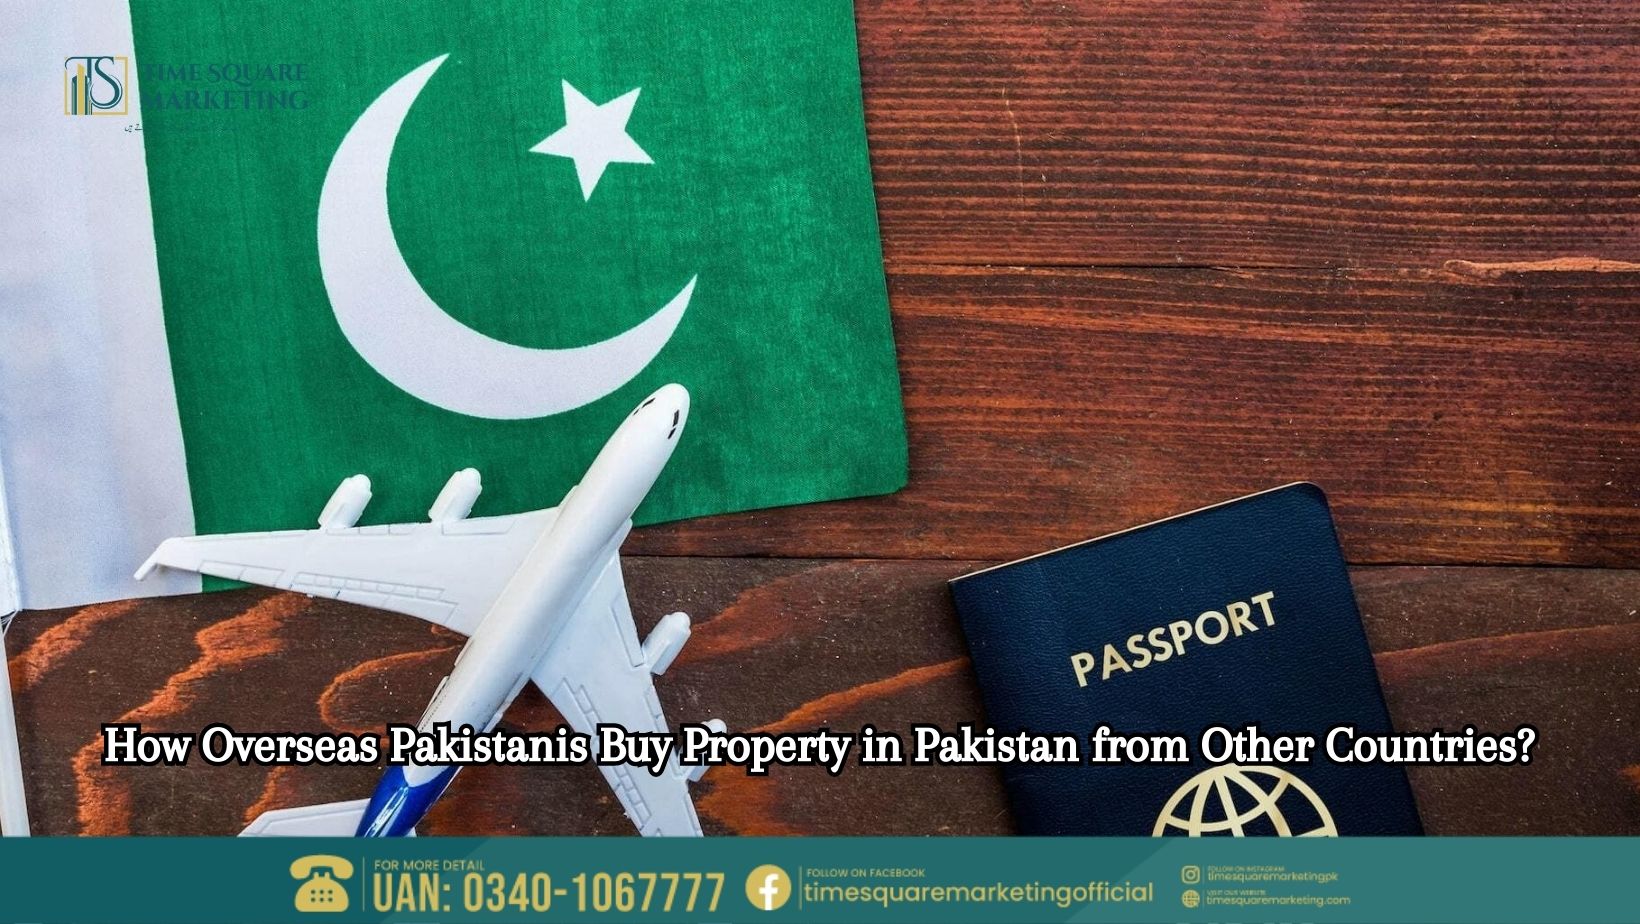 How Overseas Pakistanis Buy Property in Pakistan from Other Countries